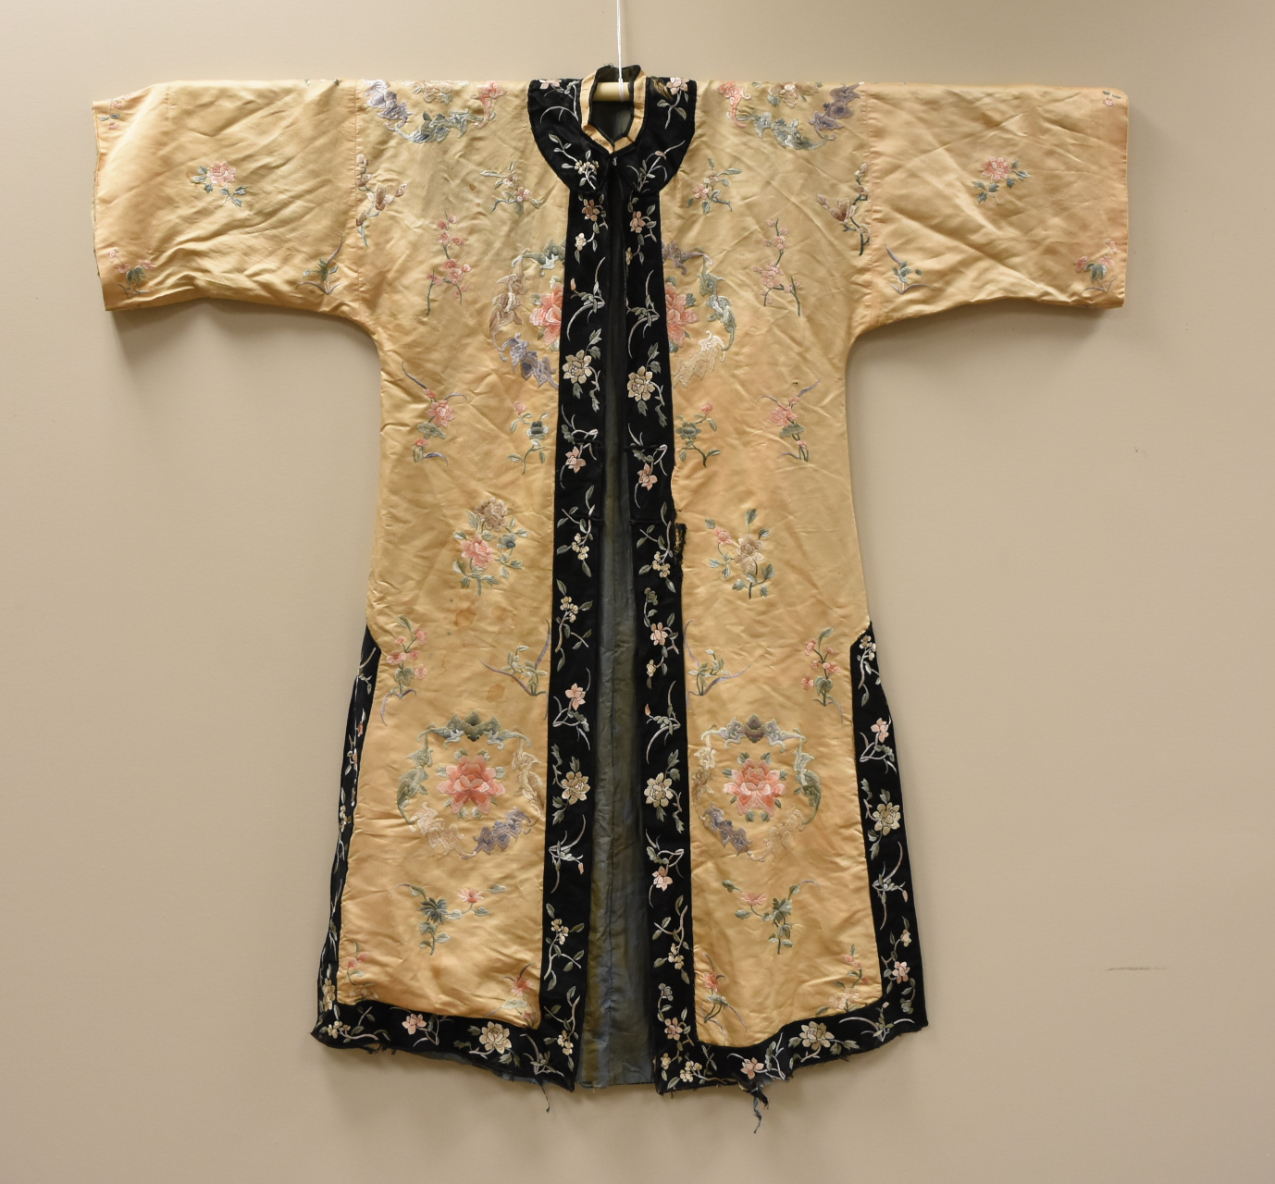 CHINESE EMBROIDERY ROBE LATE QING 2ced52